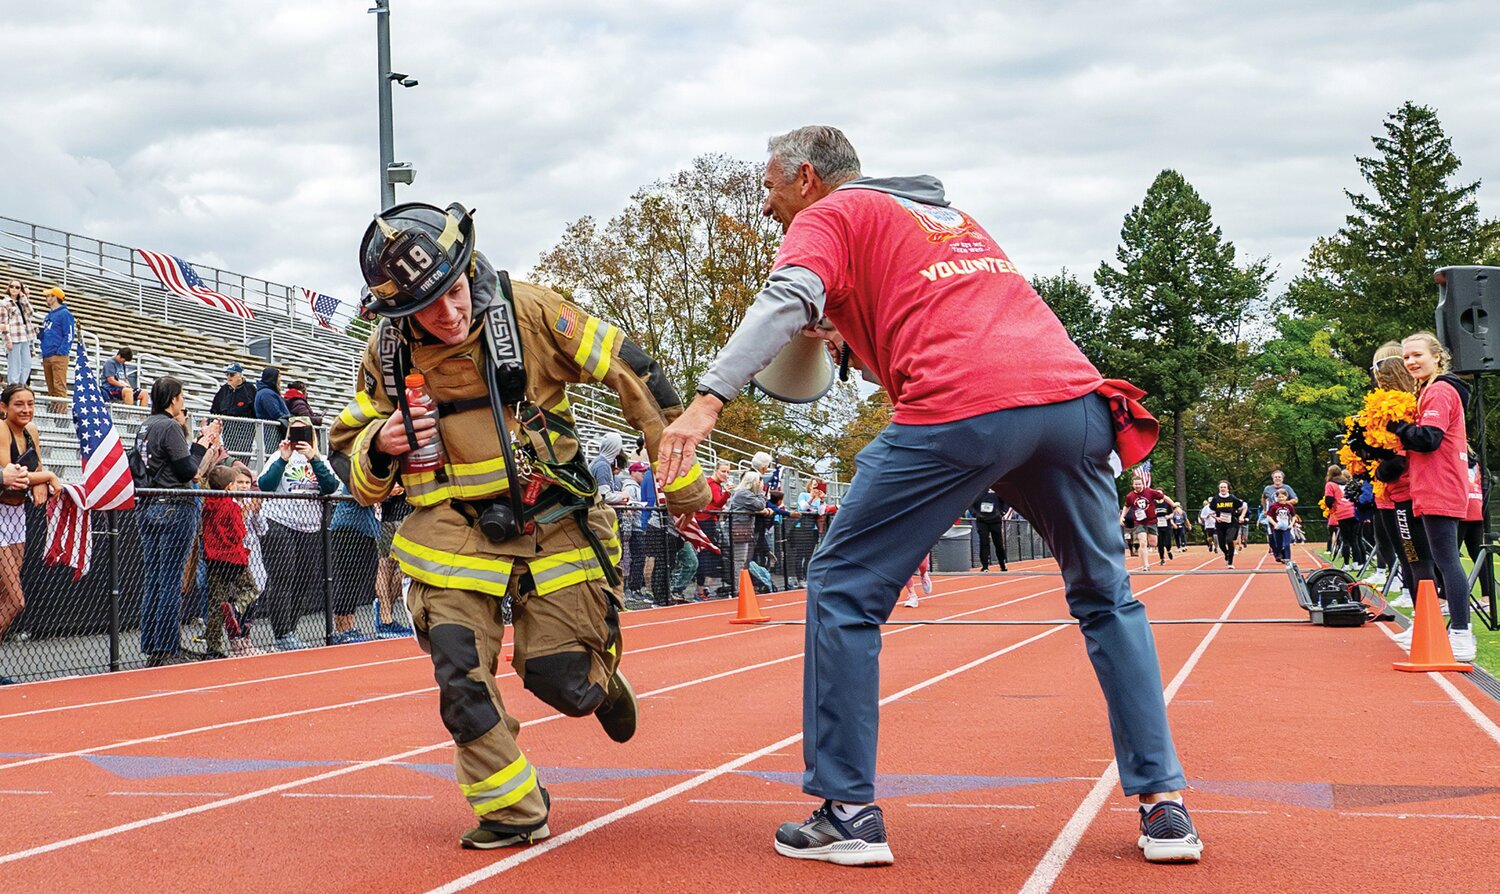 A volunteer firefighter gets a low-five from a volunteer.